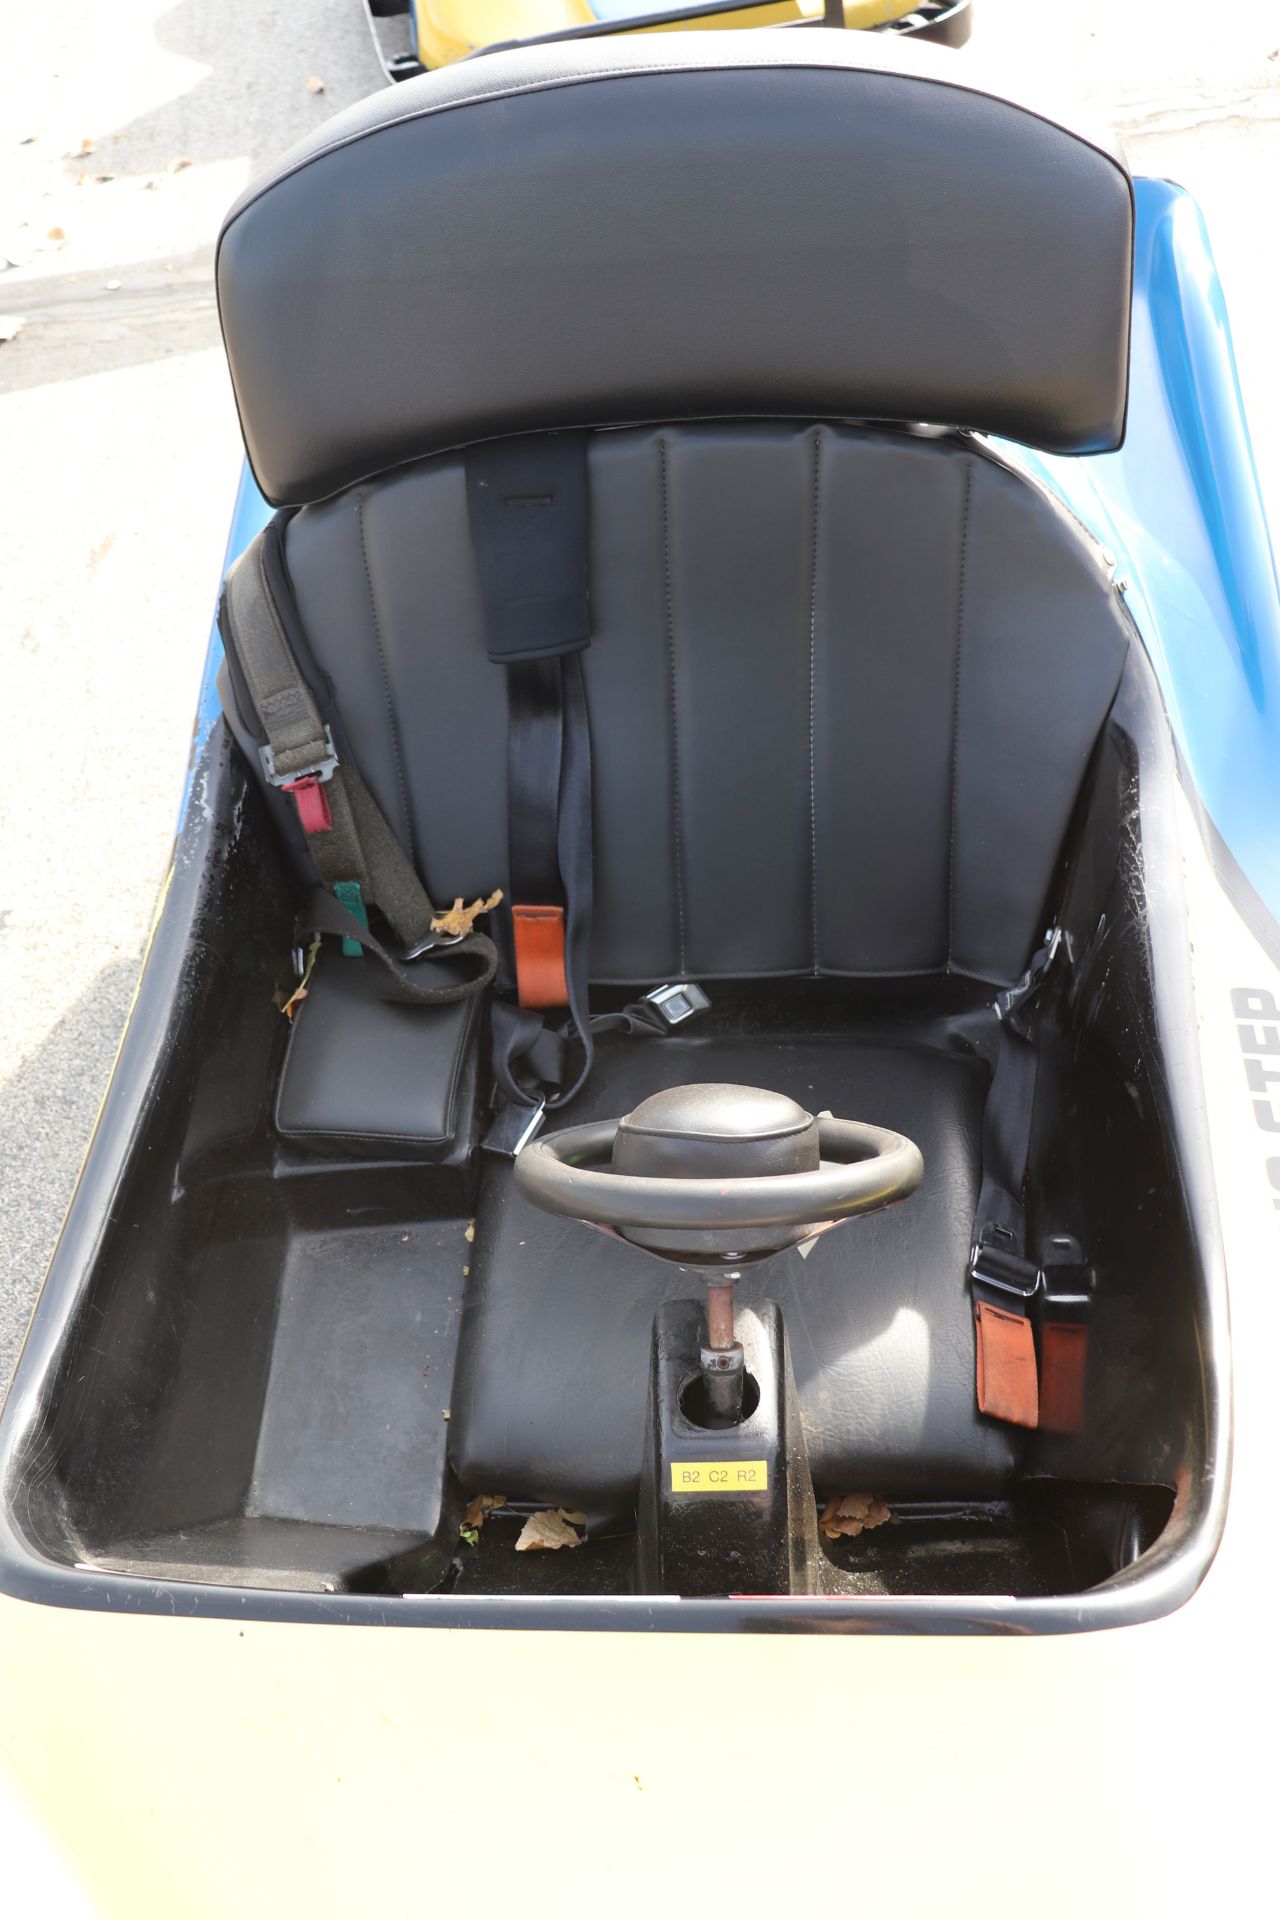 #2 F3000 go-kart with 6-year old motor - Image 3 of 4